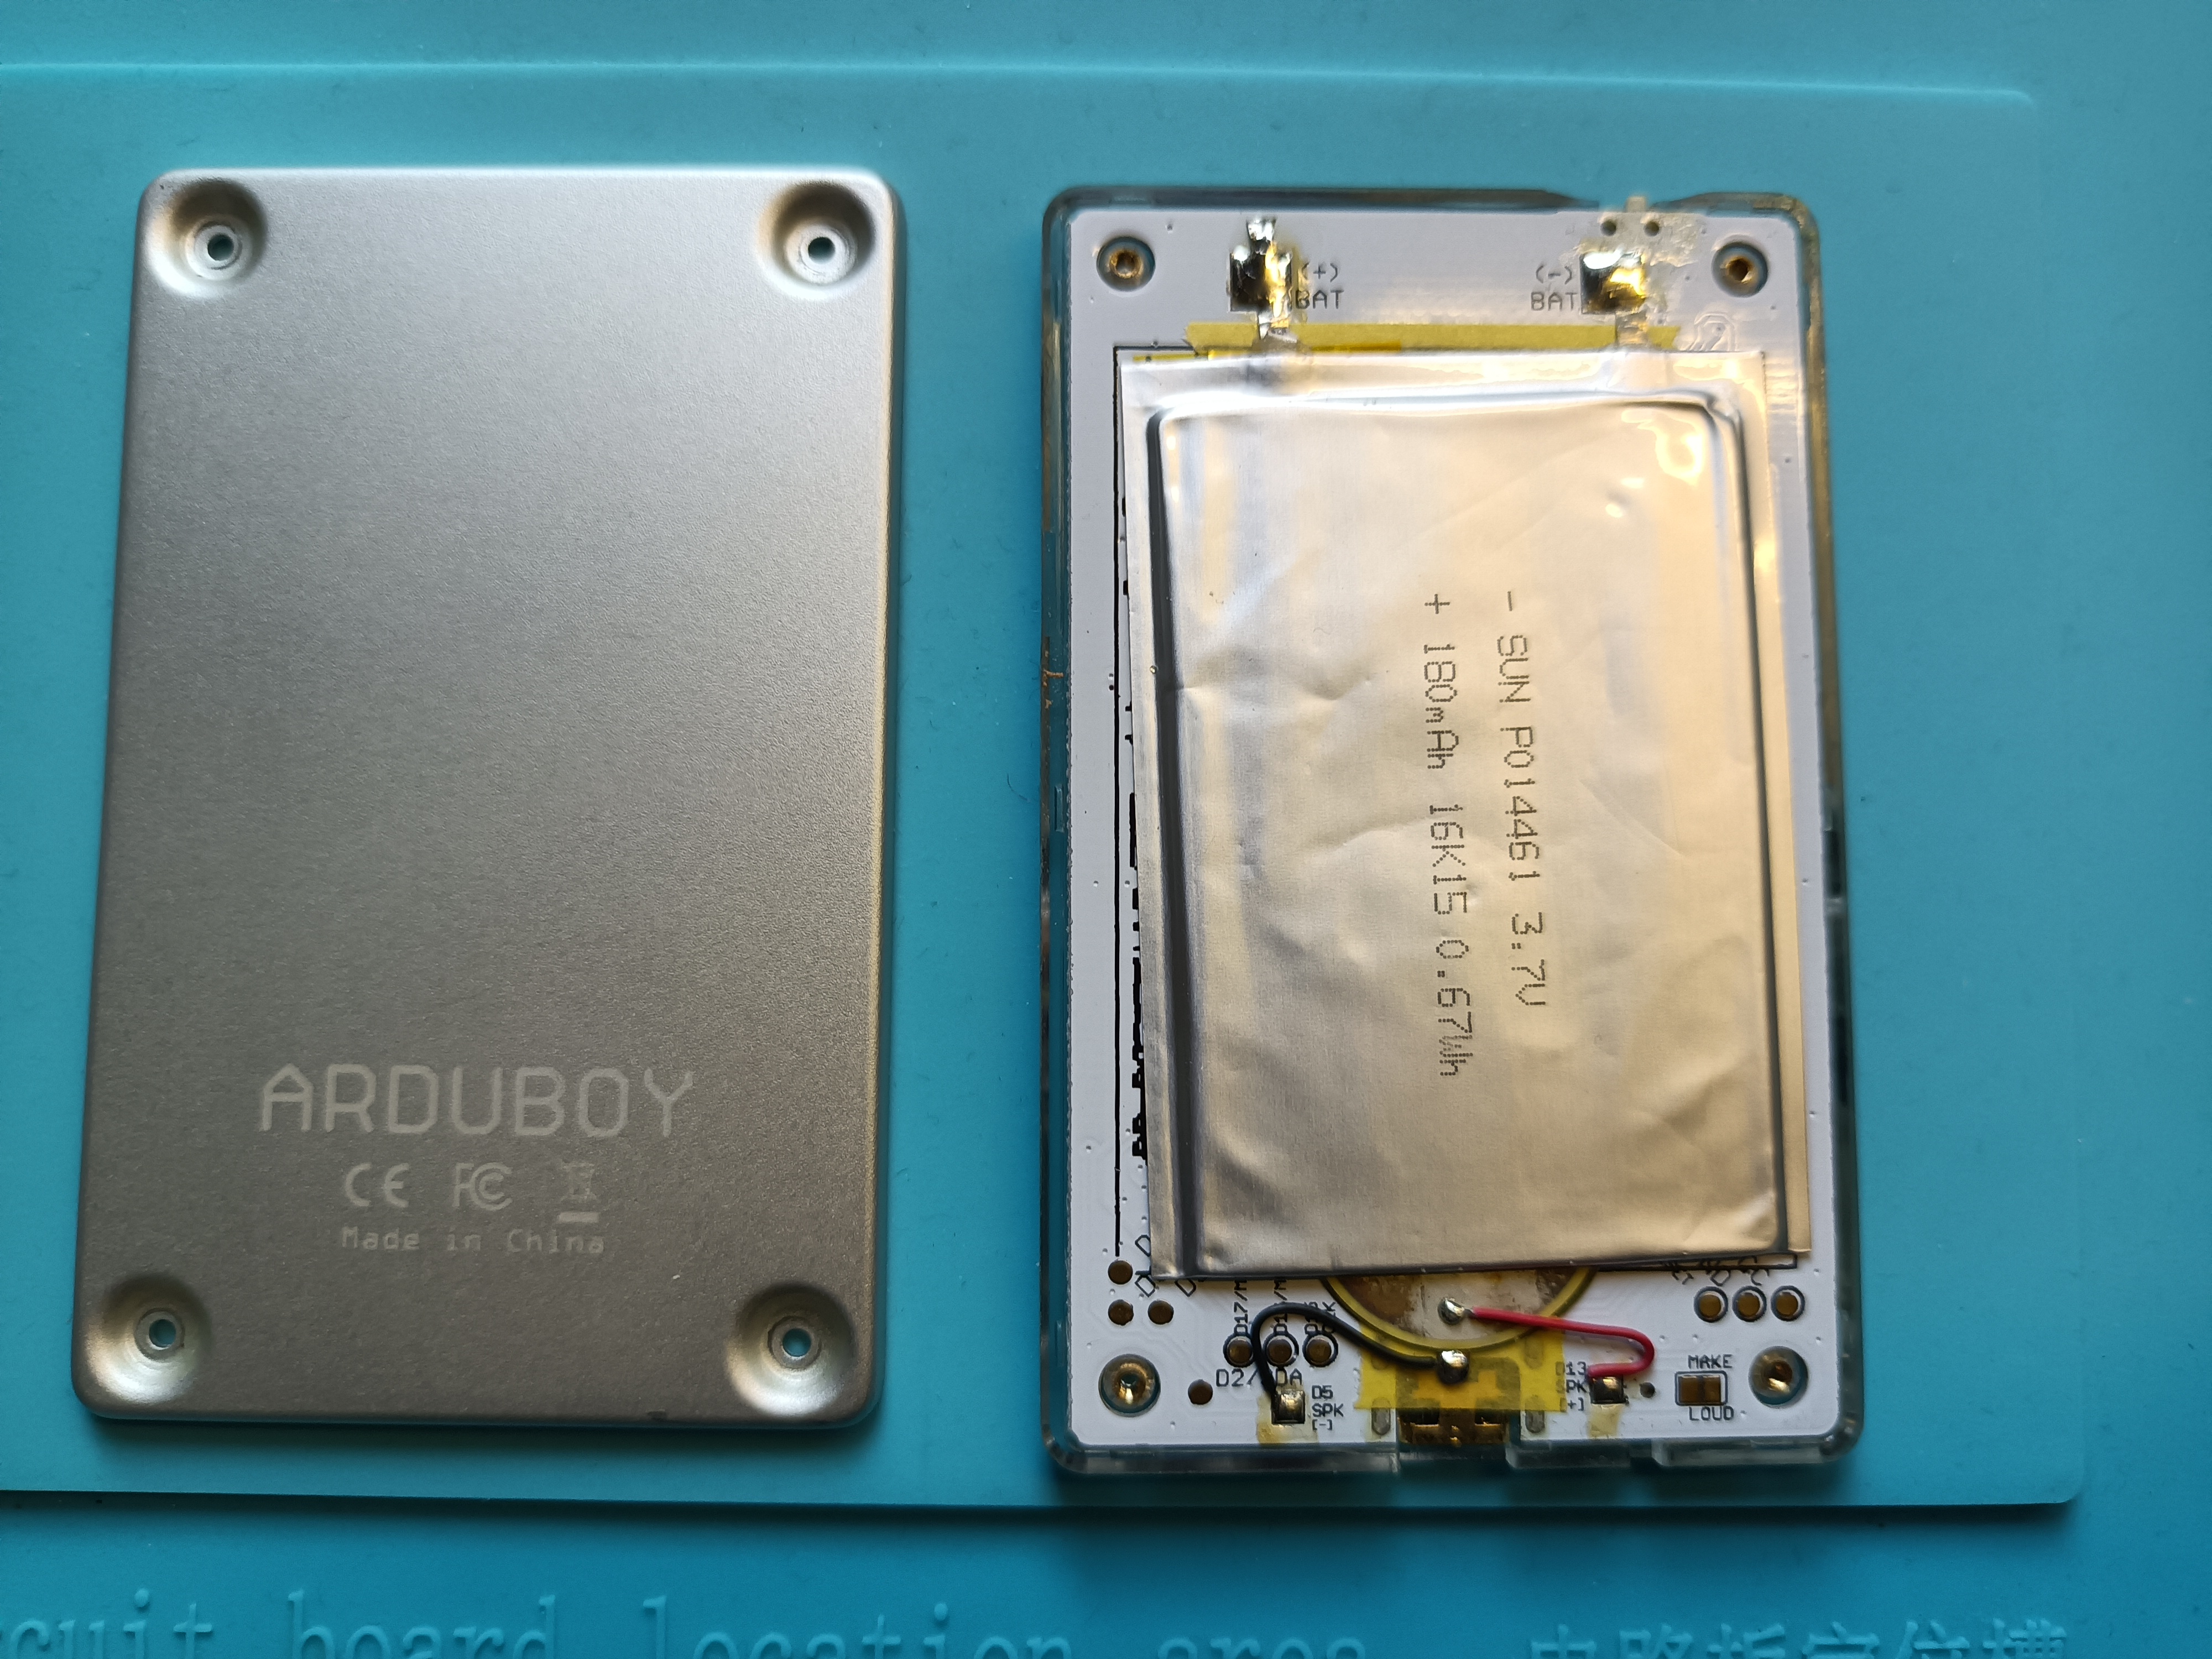 Arduboy with back removed